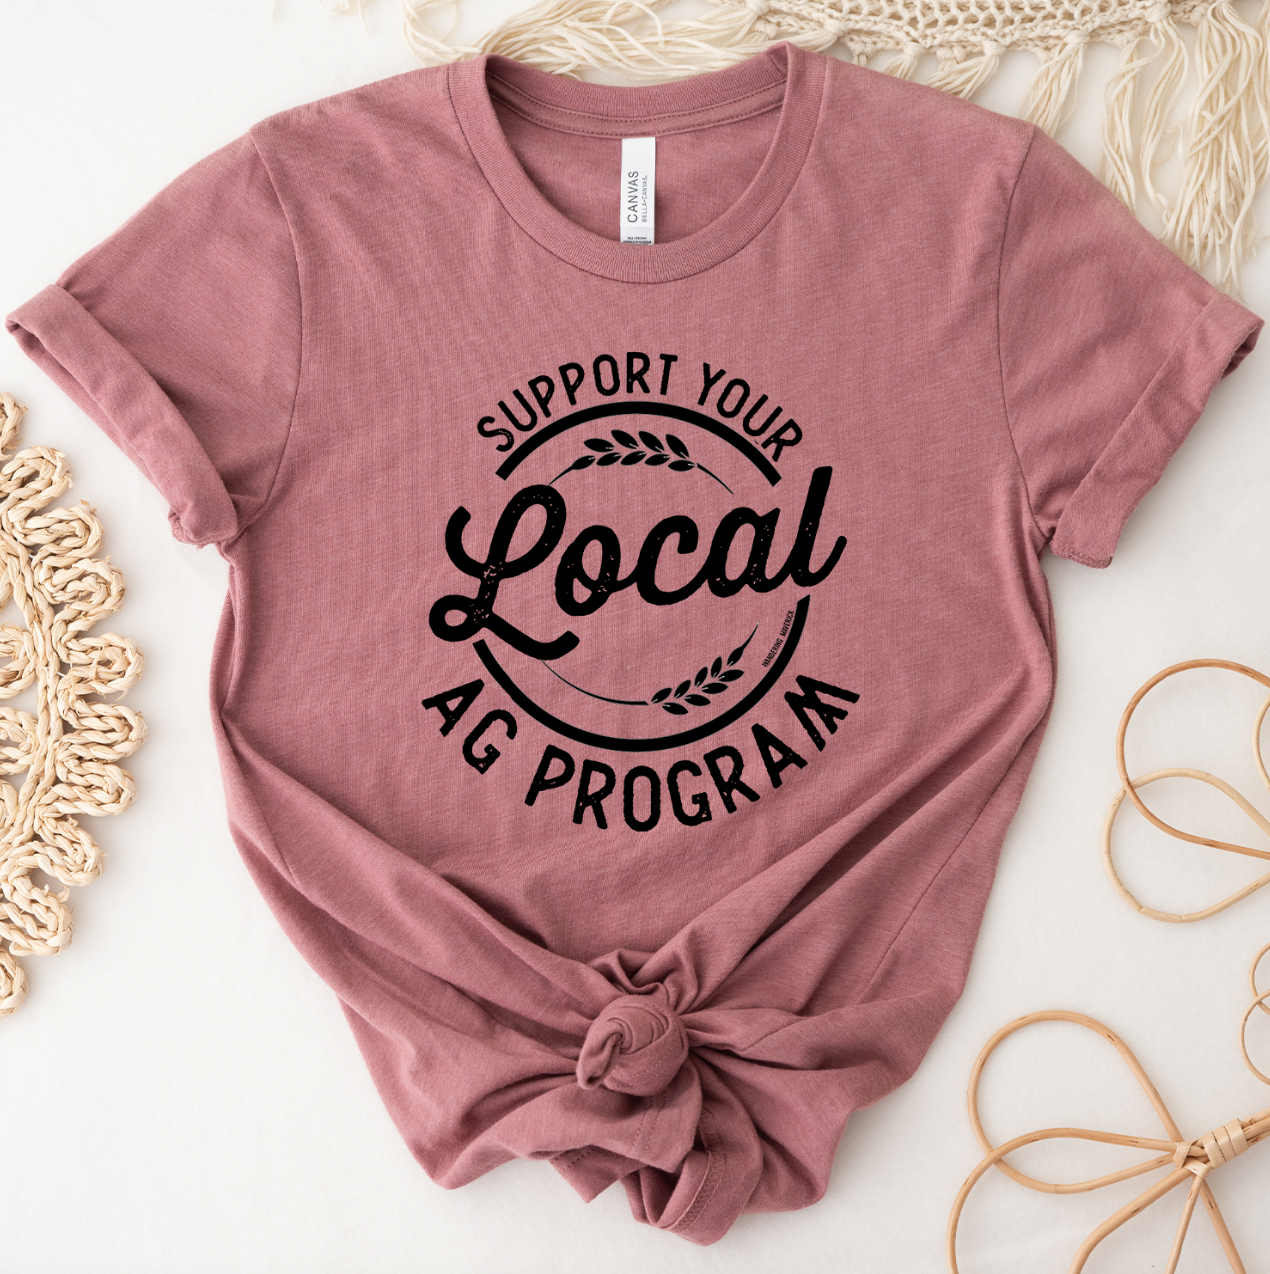 Support Your Local Ag Program T-Shirt (XS-4XL) - Multiple Colors!